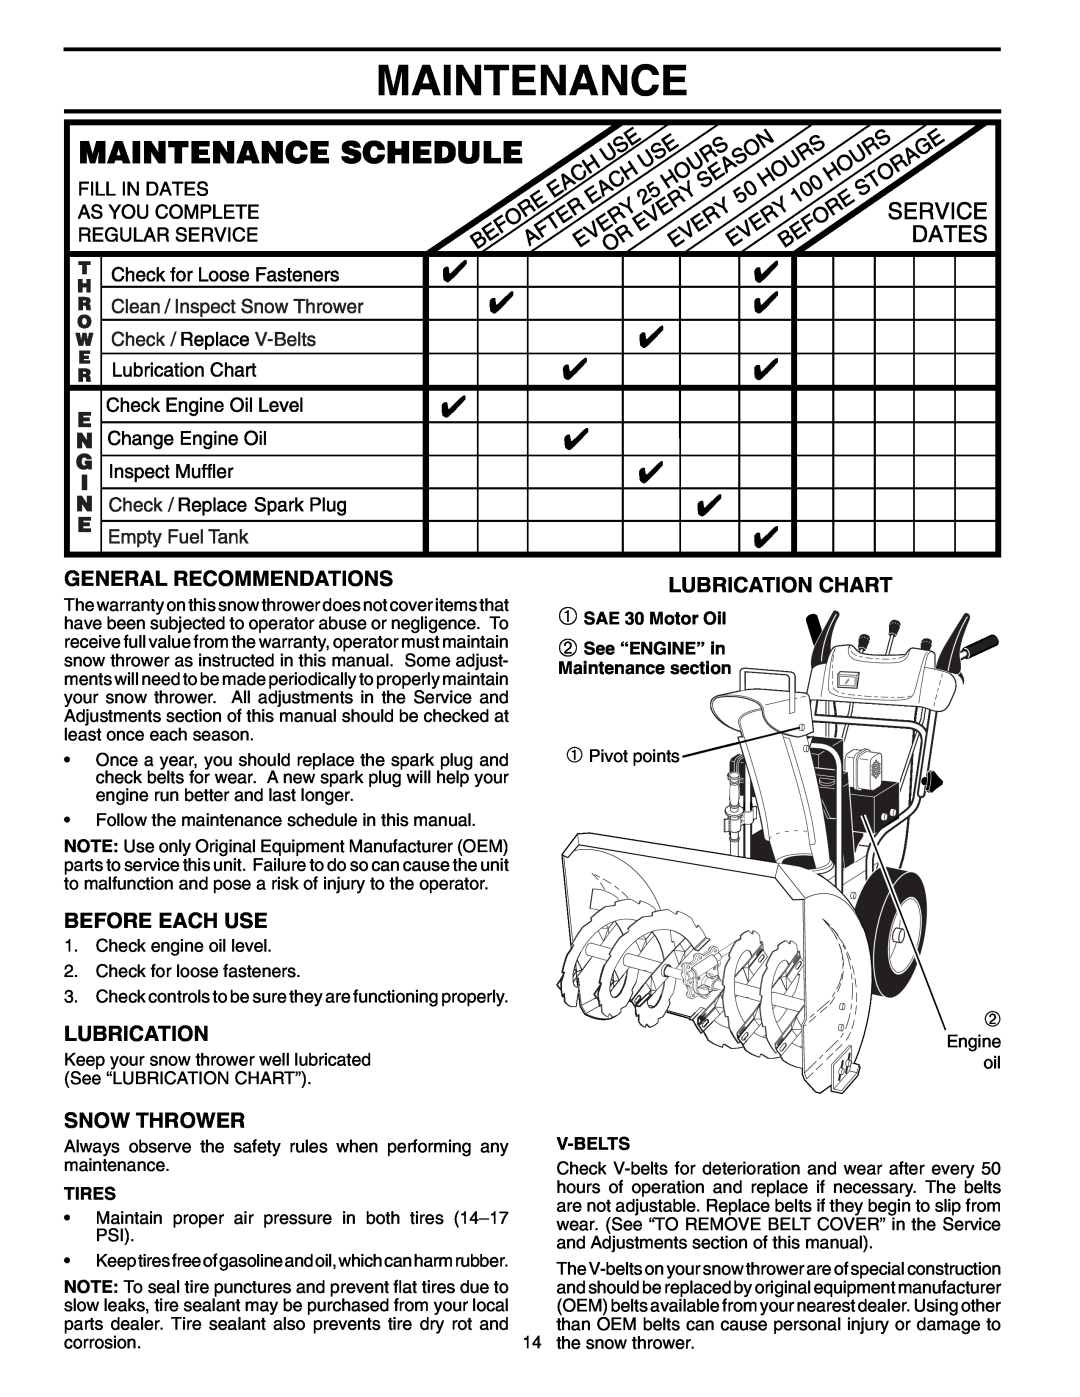 Poulan 961970004 Maintenance, General Recommendations, Before Each Use, Lubrication Chart, Snow Thrower, Tires 